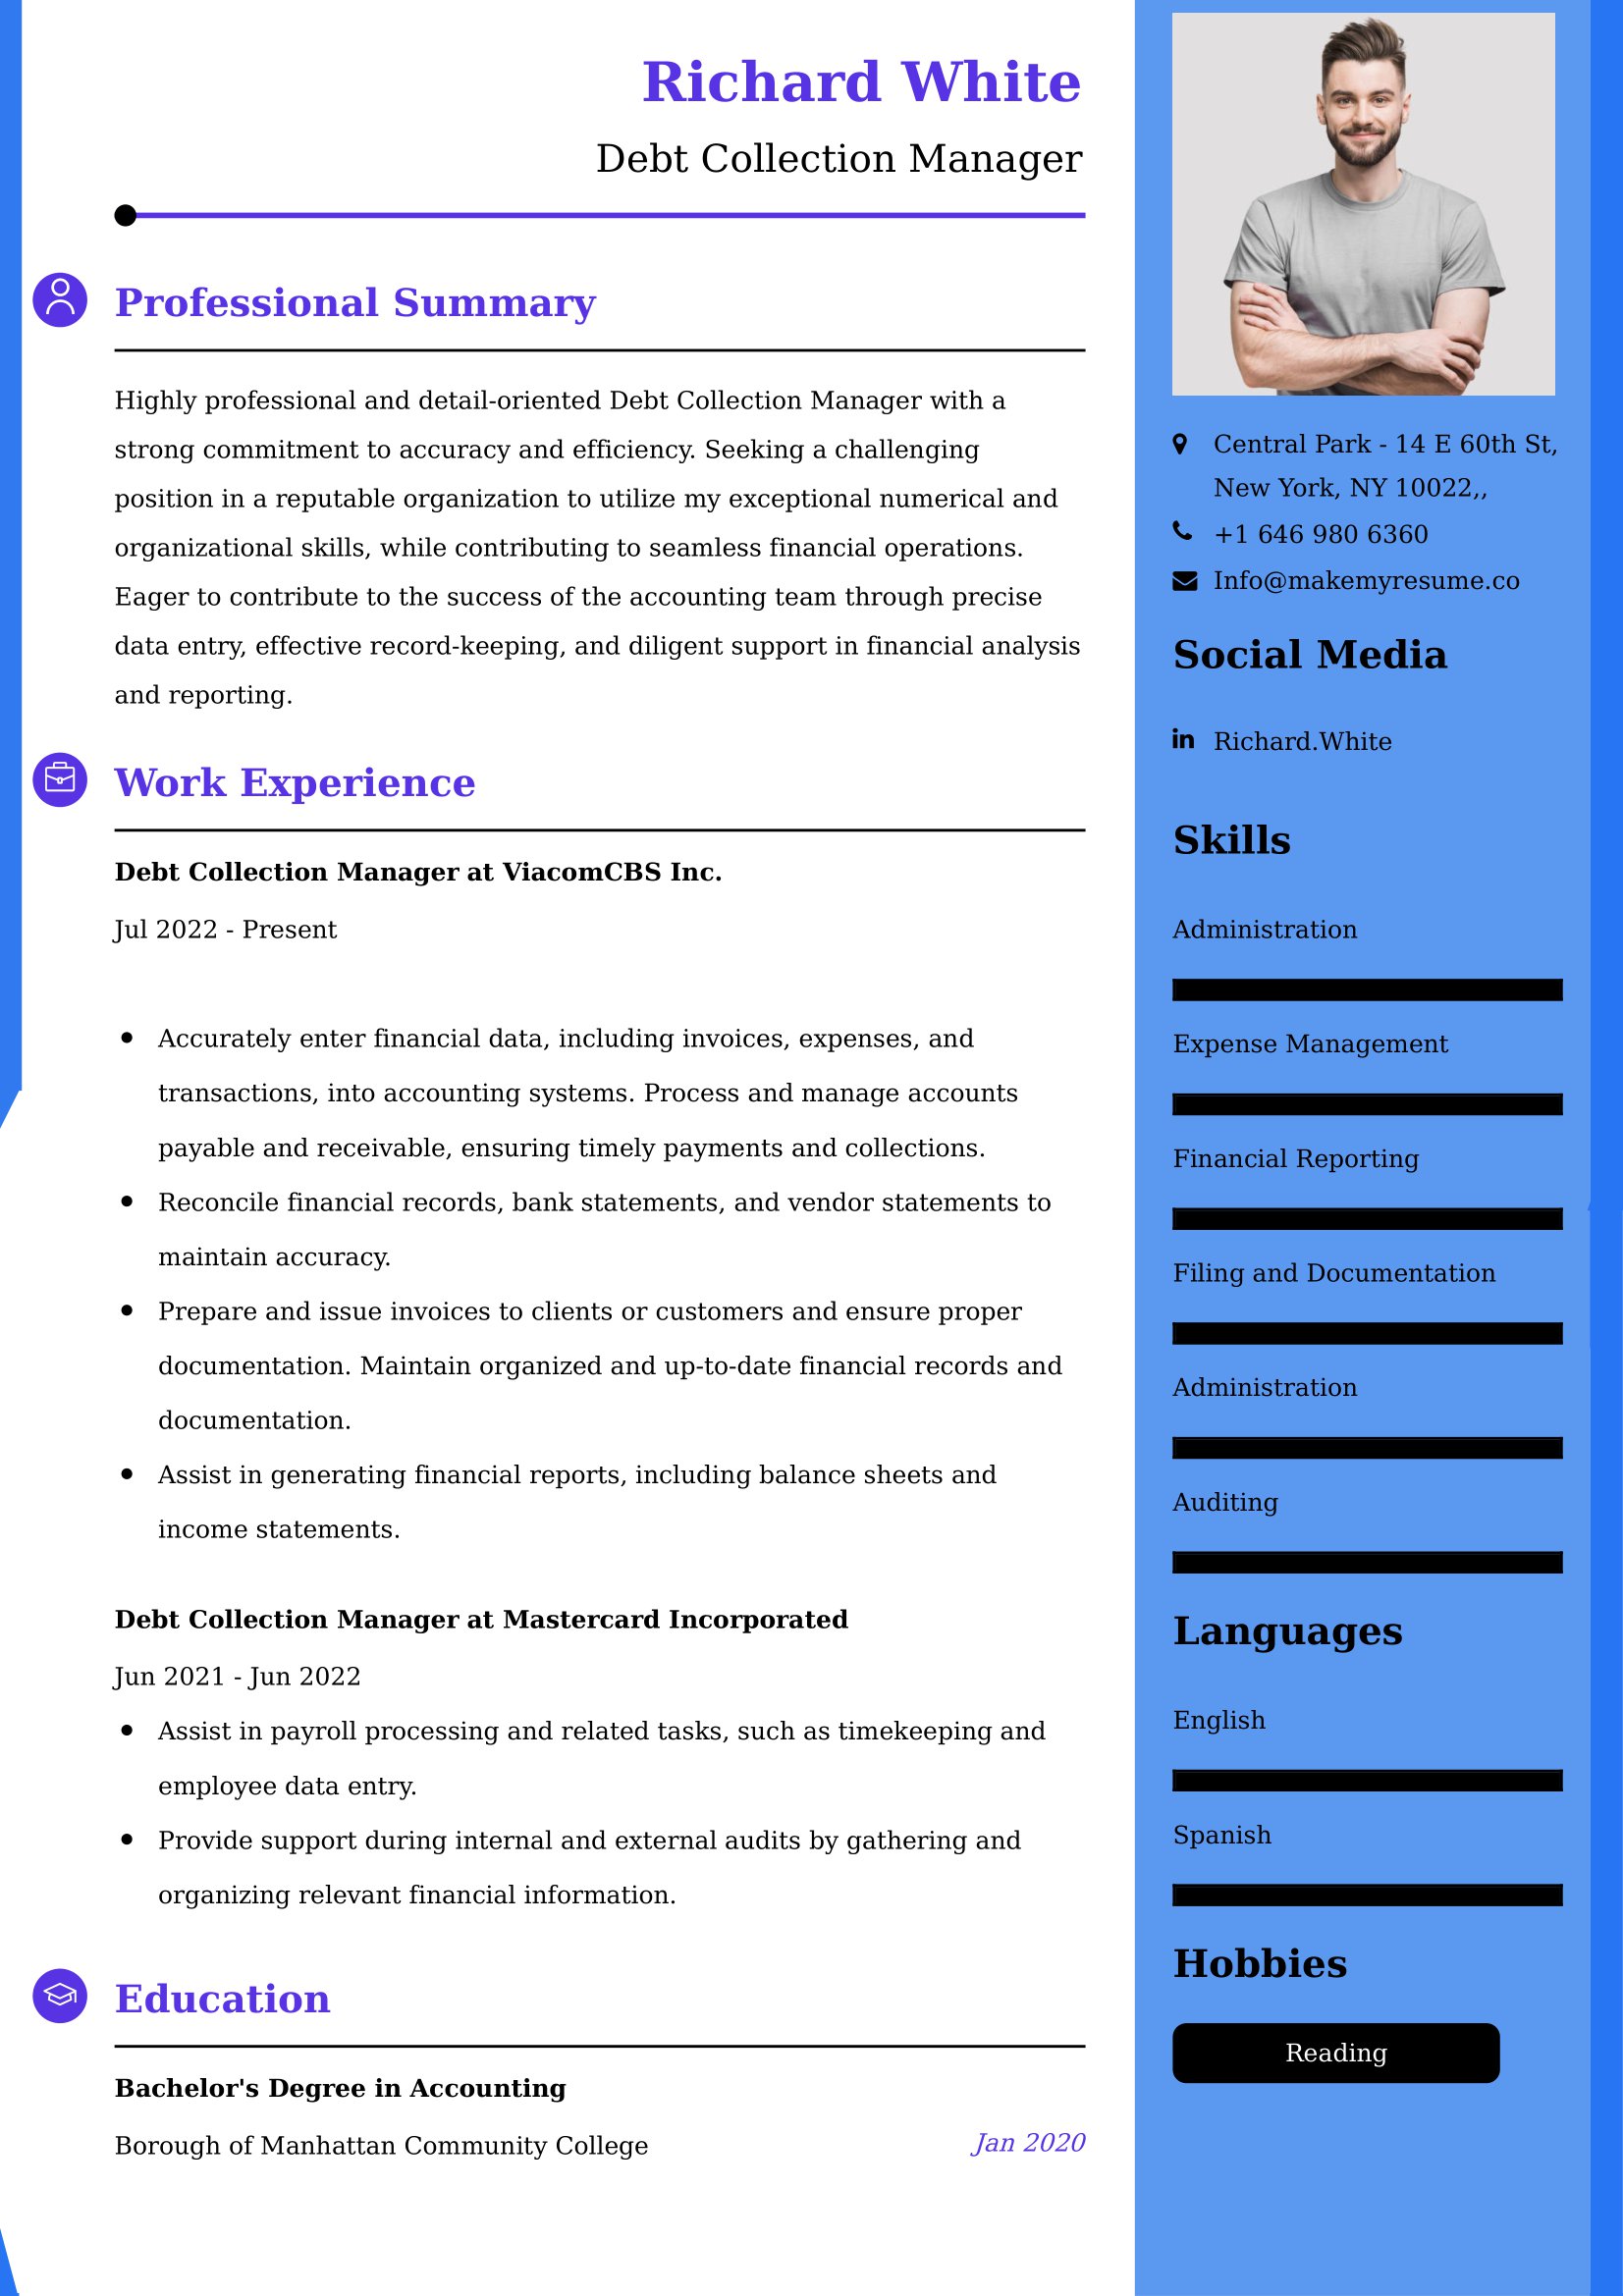 Debt Collection Manager Resume Examples - UK Format, Latest Template.